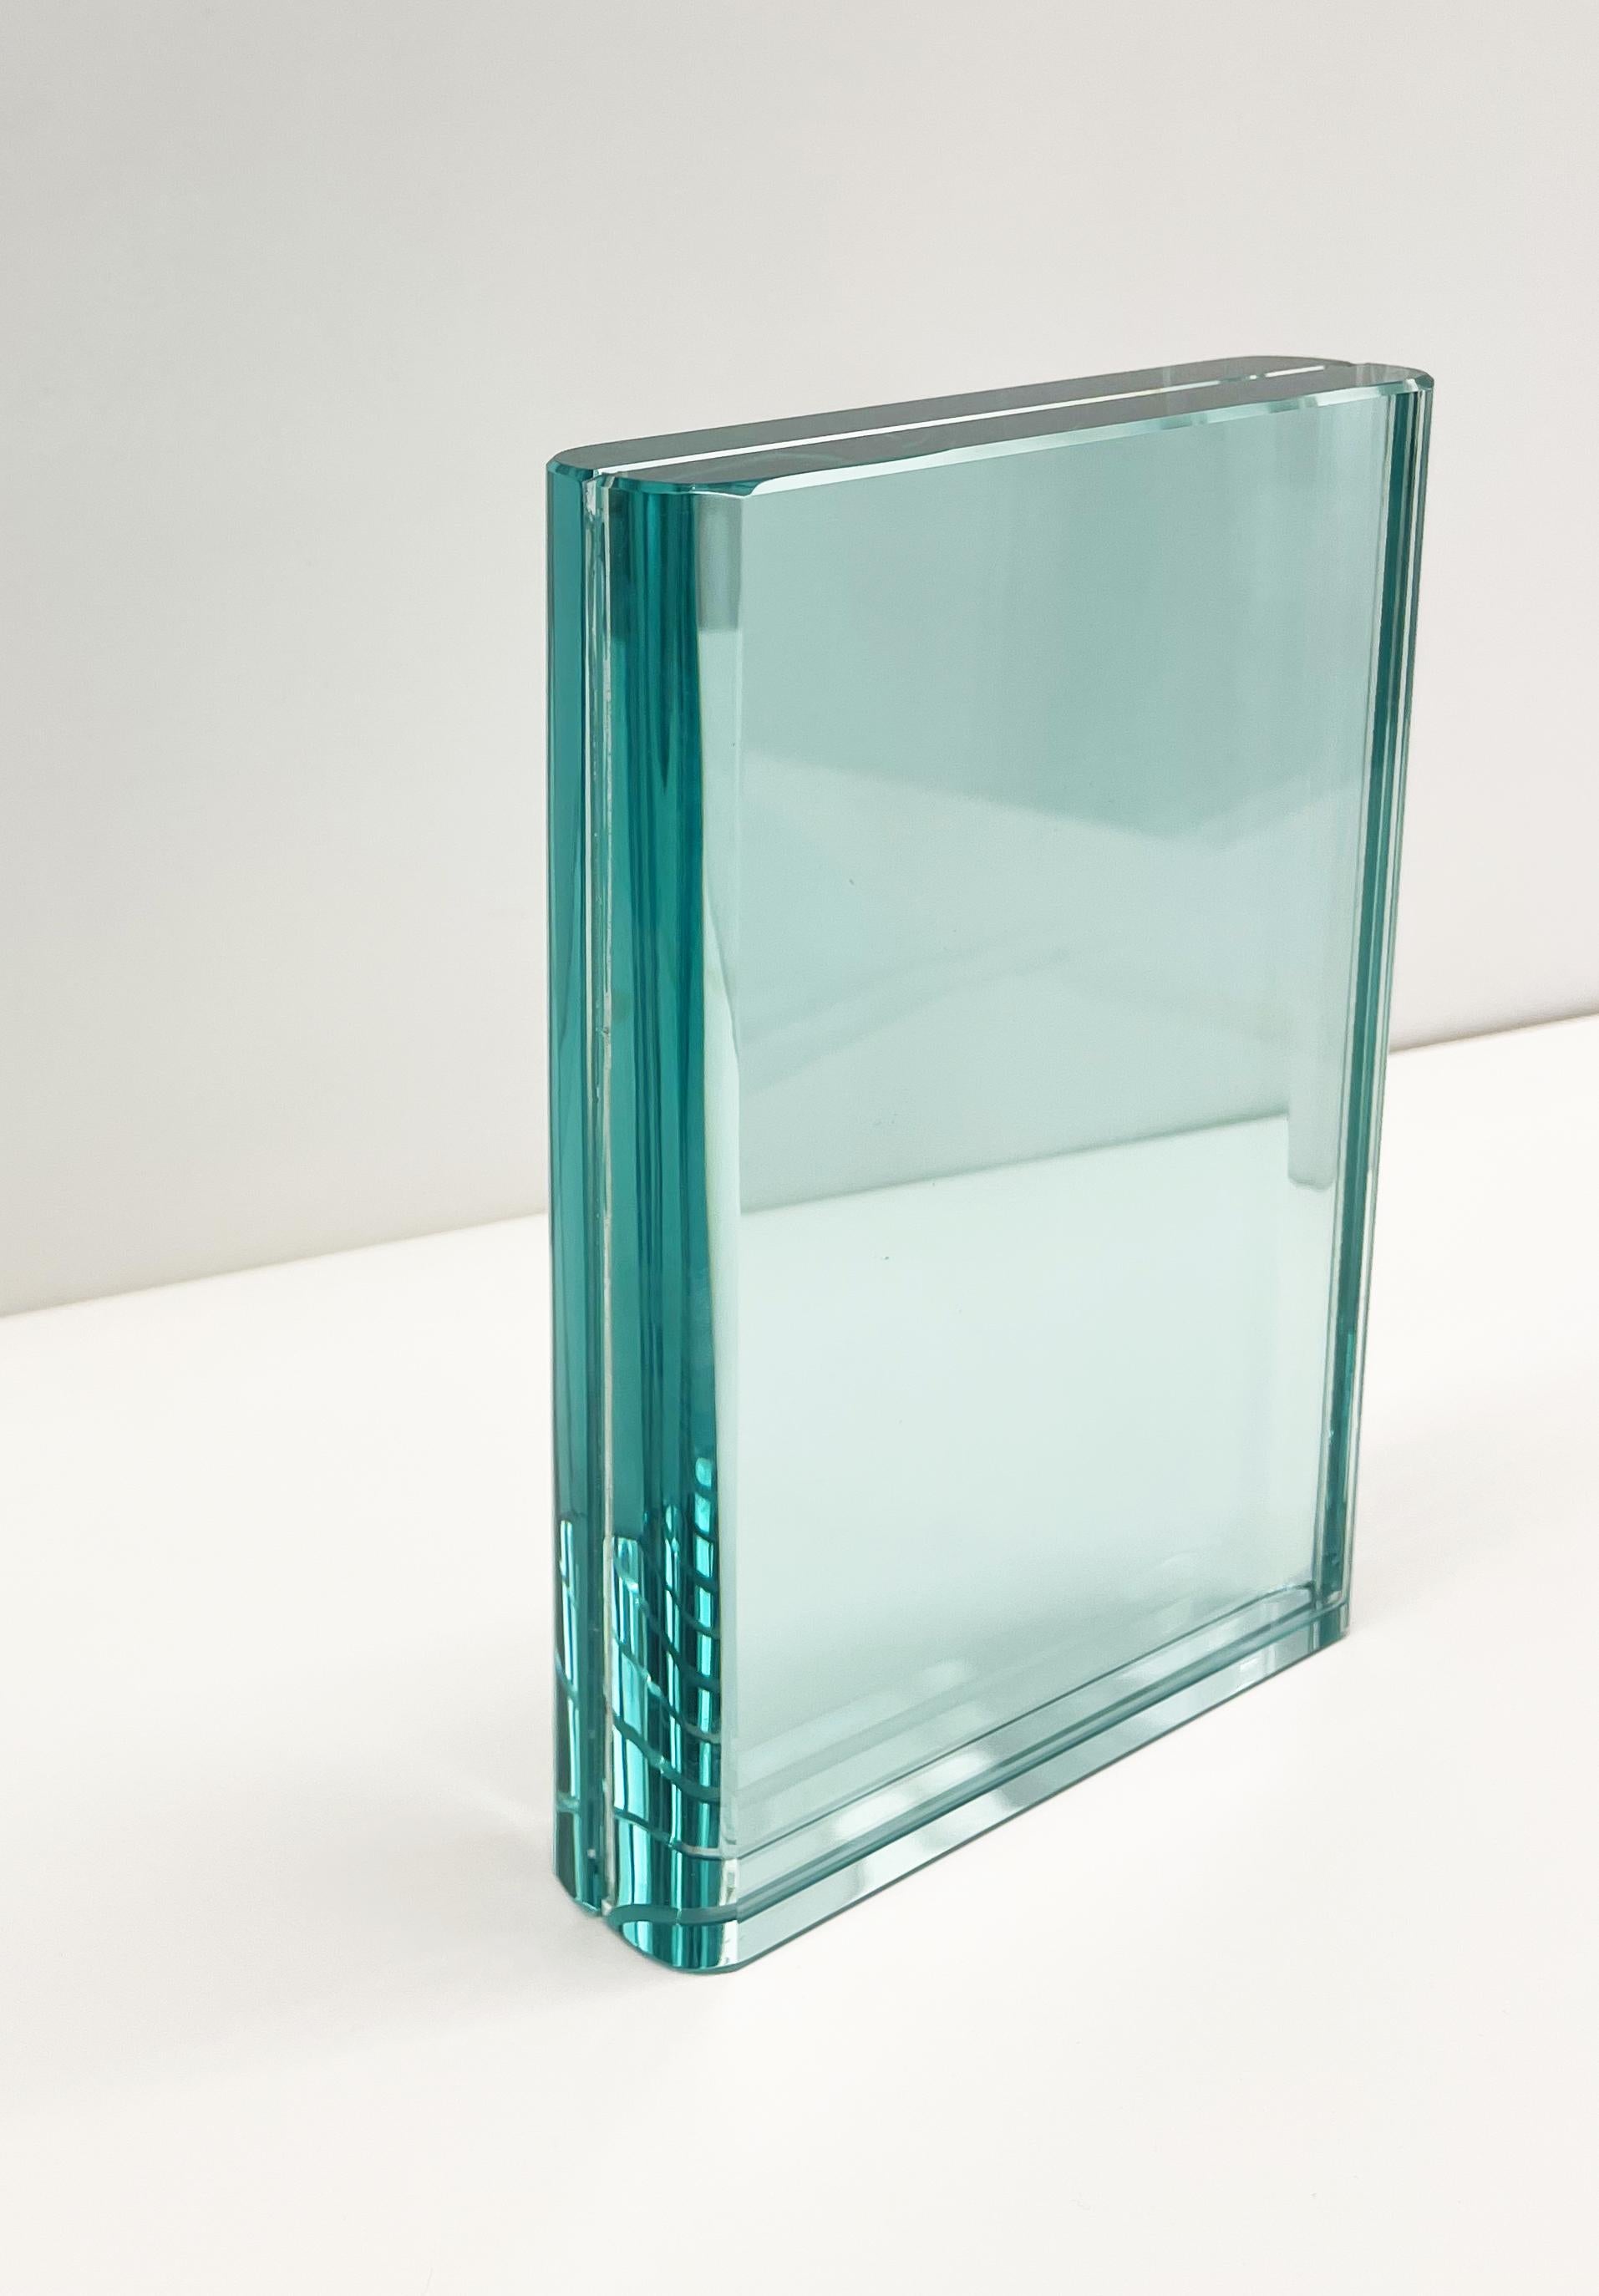 2021 Collection of picture frames by Ghirò Studio.
Vertical picture frame of excellent workmanship and artistic quality.
The rounded edges give harmony and elegance.
The high transparency crystal has very bright aquamarine reflections. Being